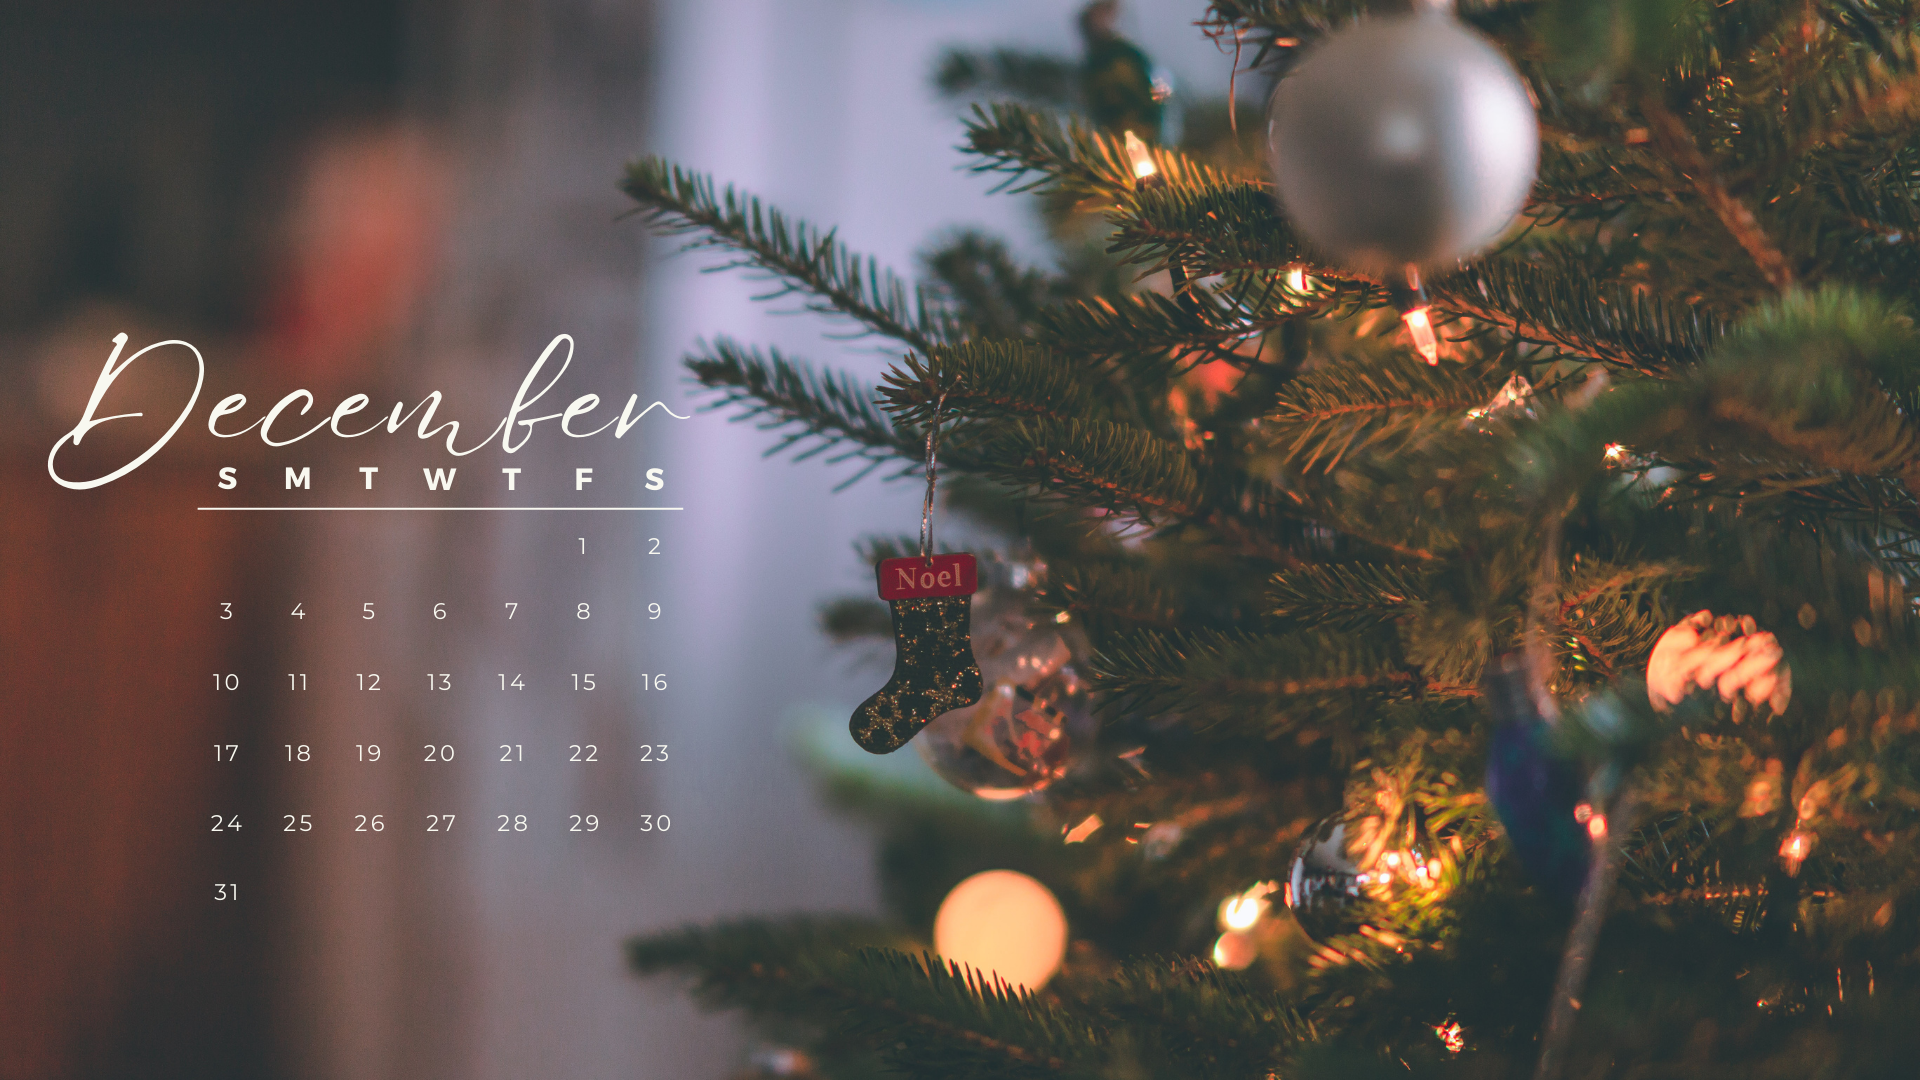 Free December 2023 Desktop Calendar Backgrounds; Here are your free December backgrounds for computers and laptops. Tech freebies for this month!